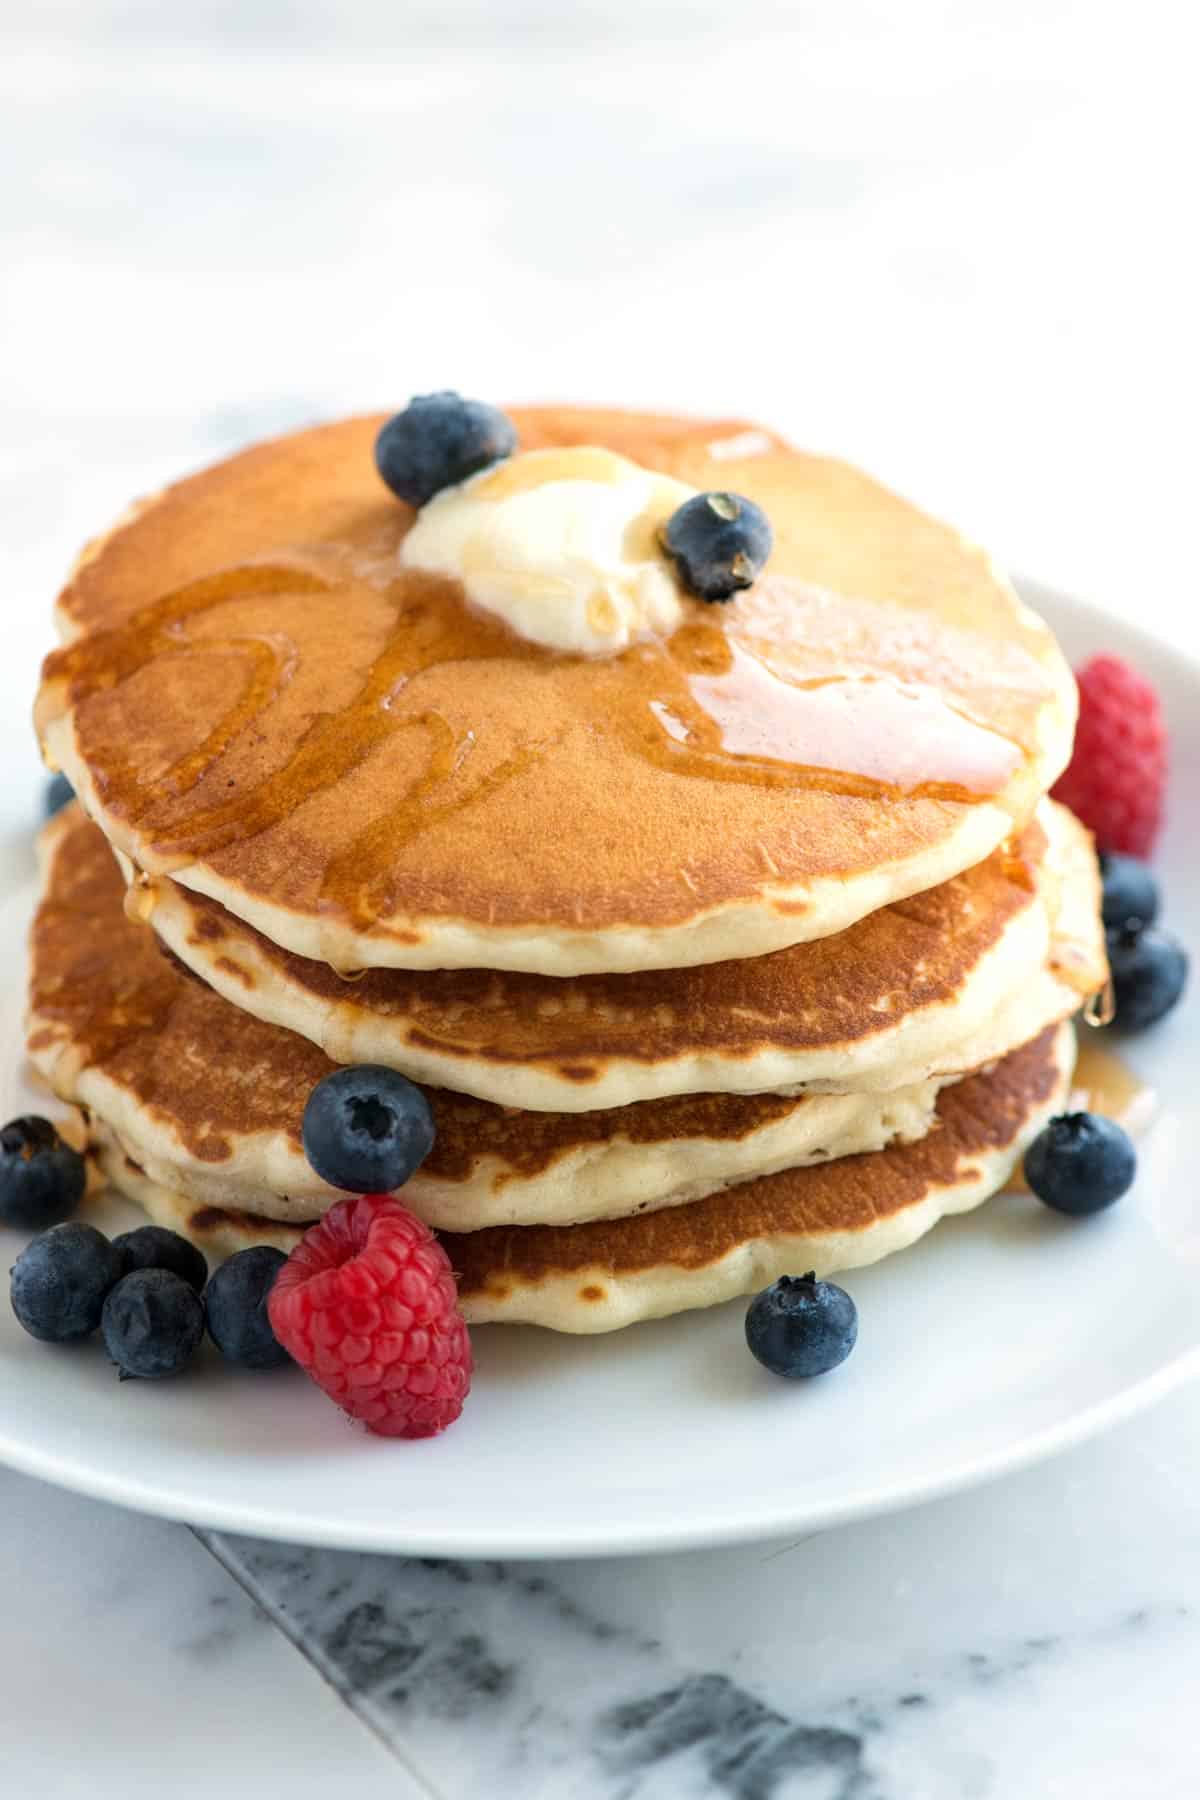 Easy Fluffy Pancakes from Scratch